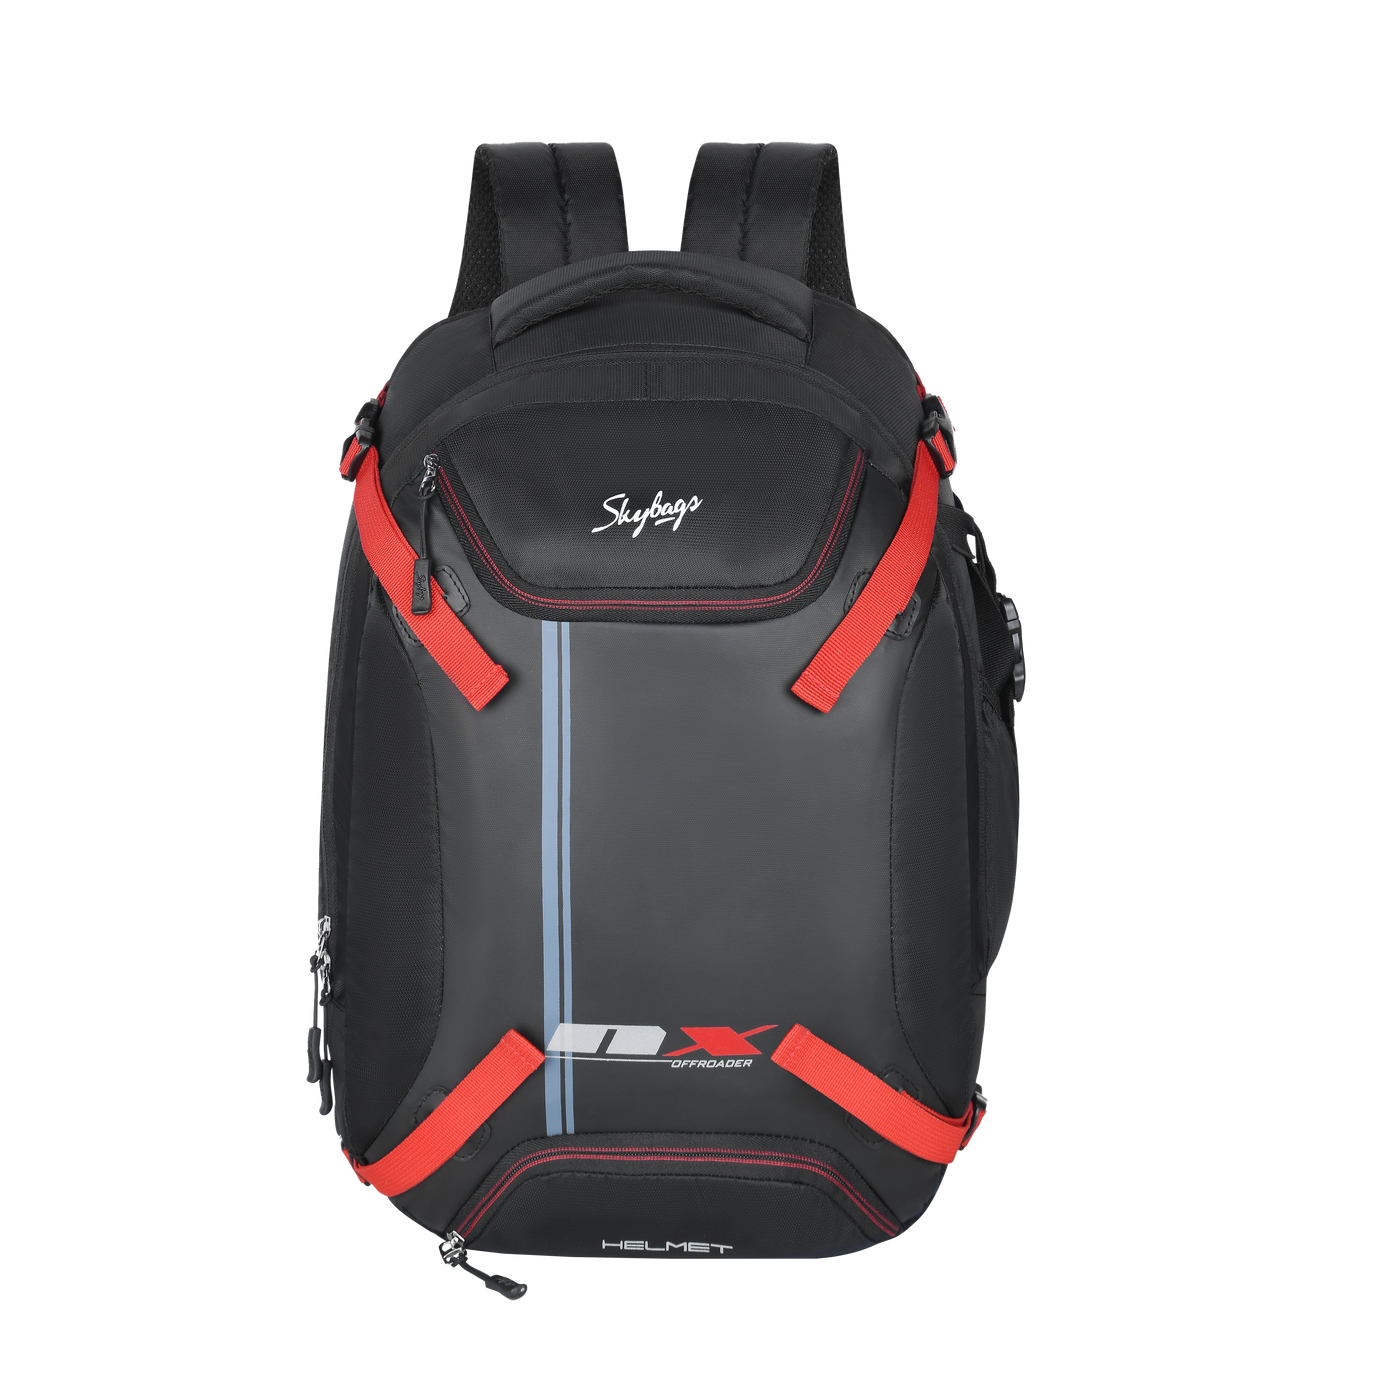 Buy Skybags Laptop Backpack 31L With 2 Spacious Compartments, Front Pocket,  Organizer & Built to Last Strap | Red | Graf Plus at Amazon.in